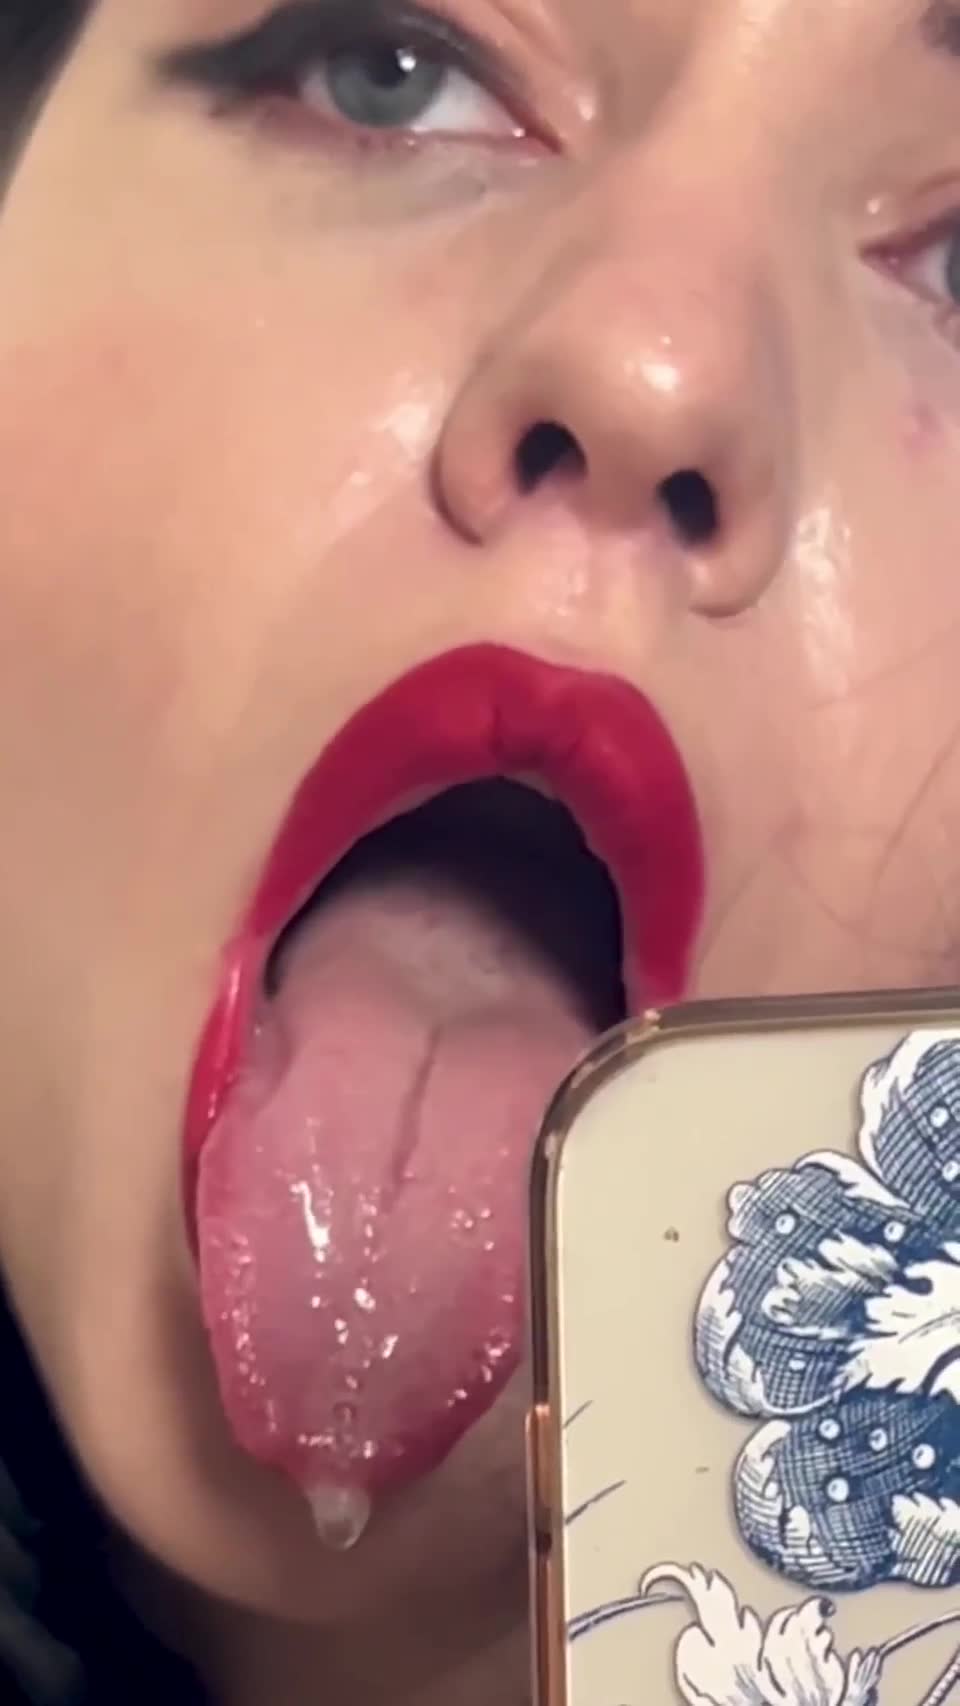 Open wide and catch it all